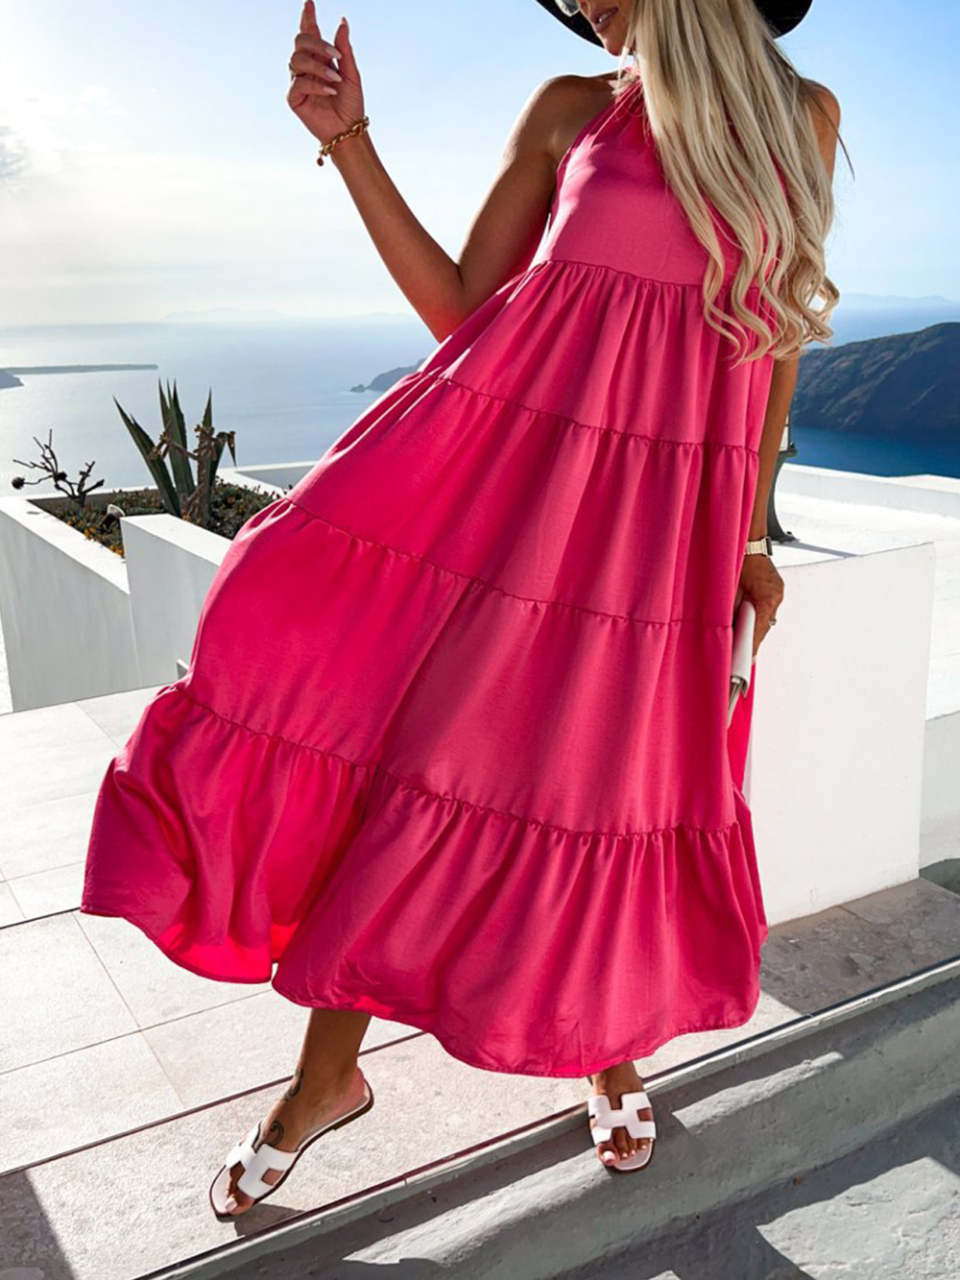 Ruched Solid Color Swing Skirt Beach Vacation Dress